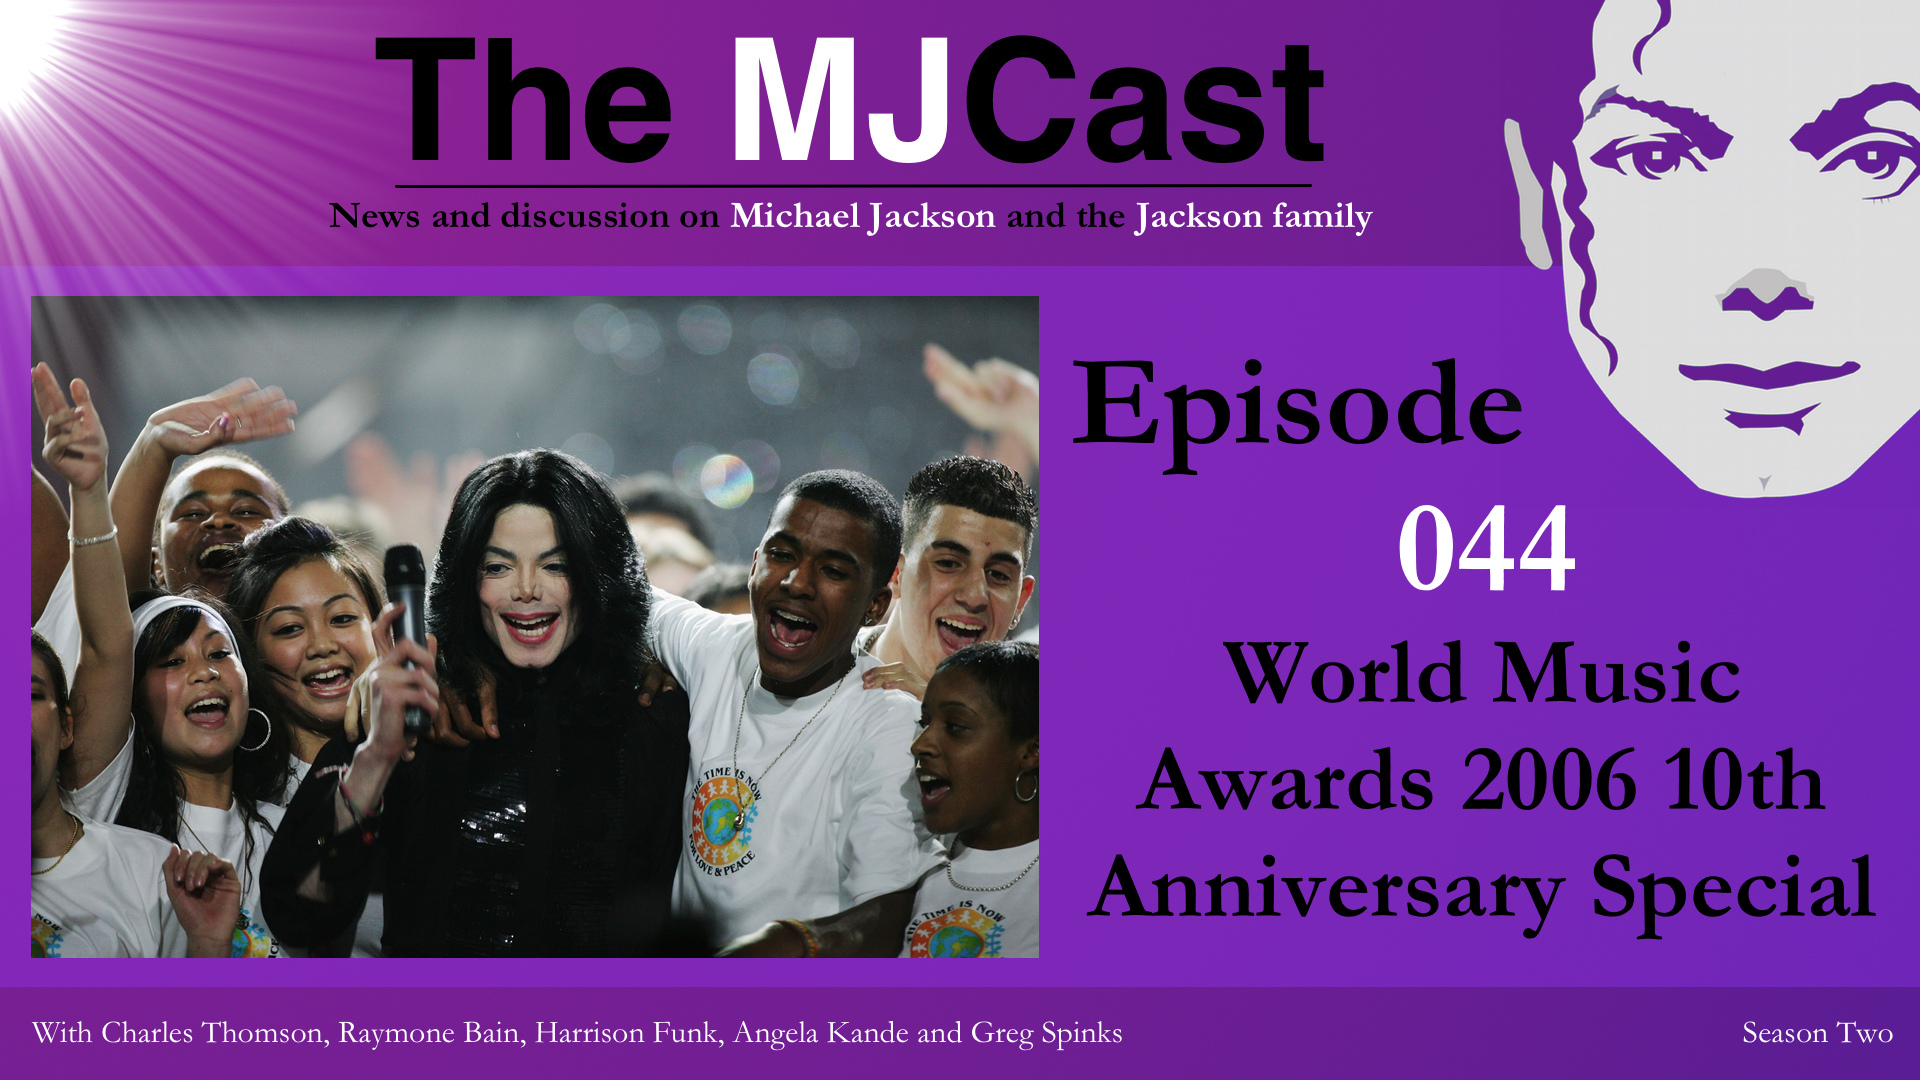 episode-044-world-music-awards-2006-10th-anniversary-special-show-art